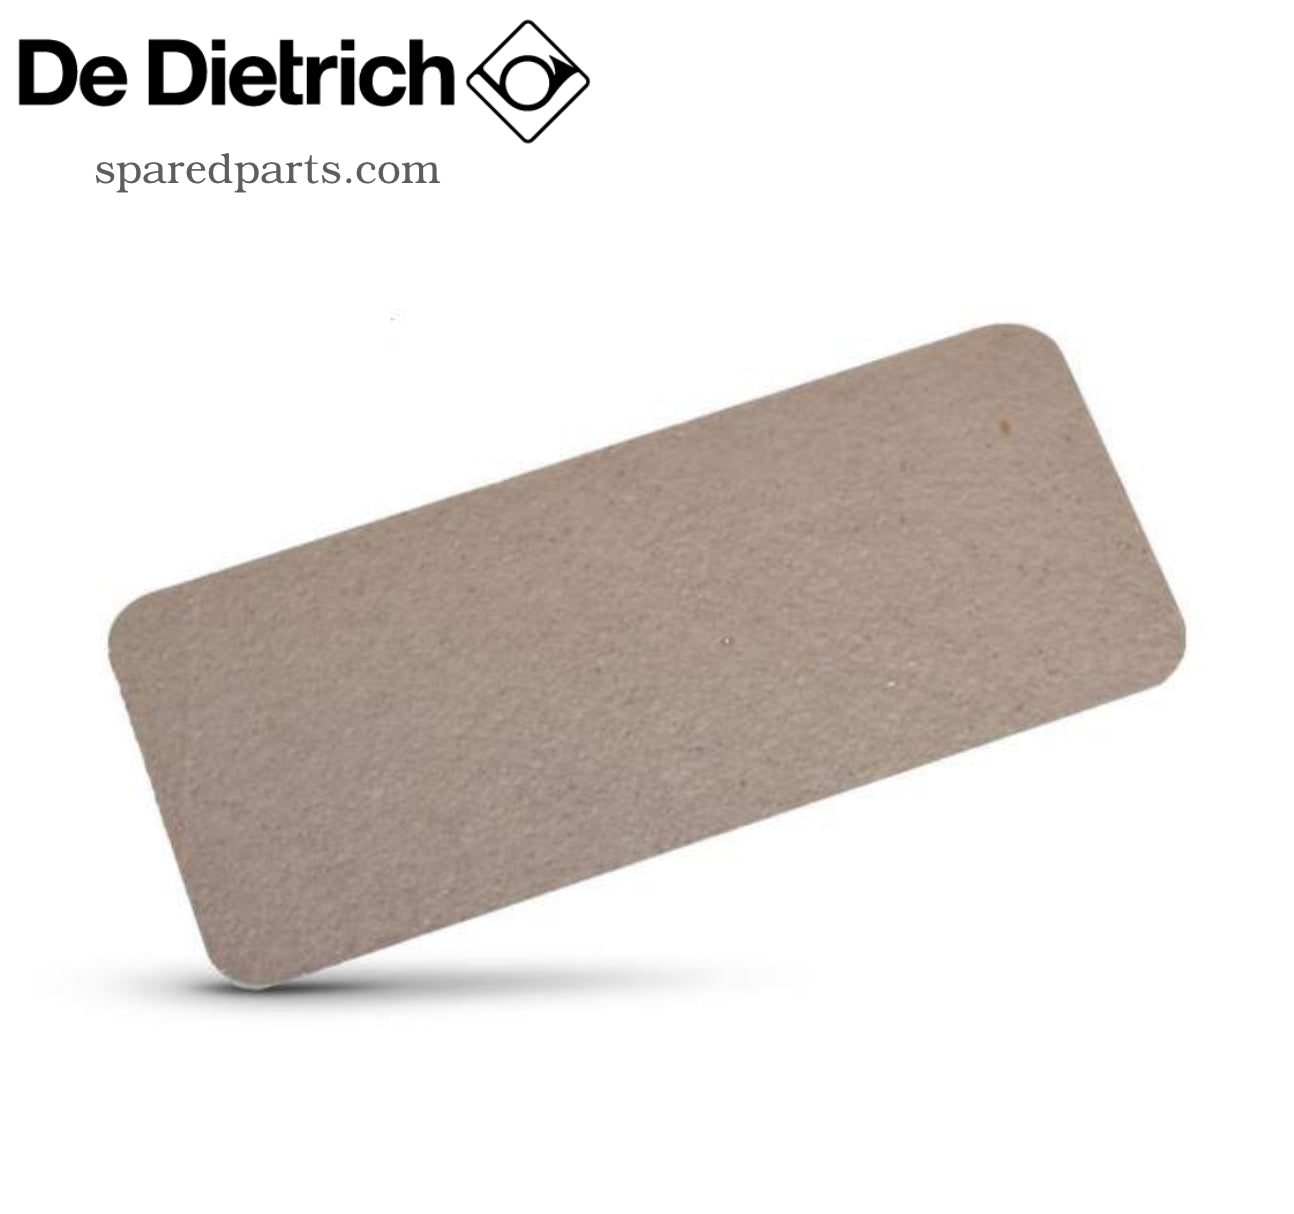 DeDietrich Microwave Wave Guard Cover - Spared Parts UK